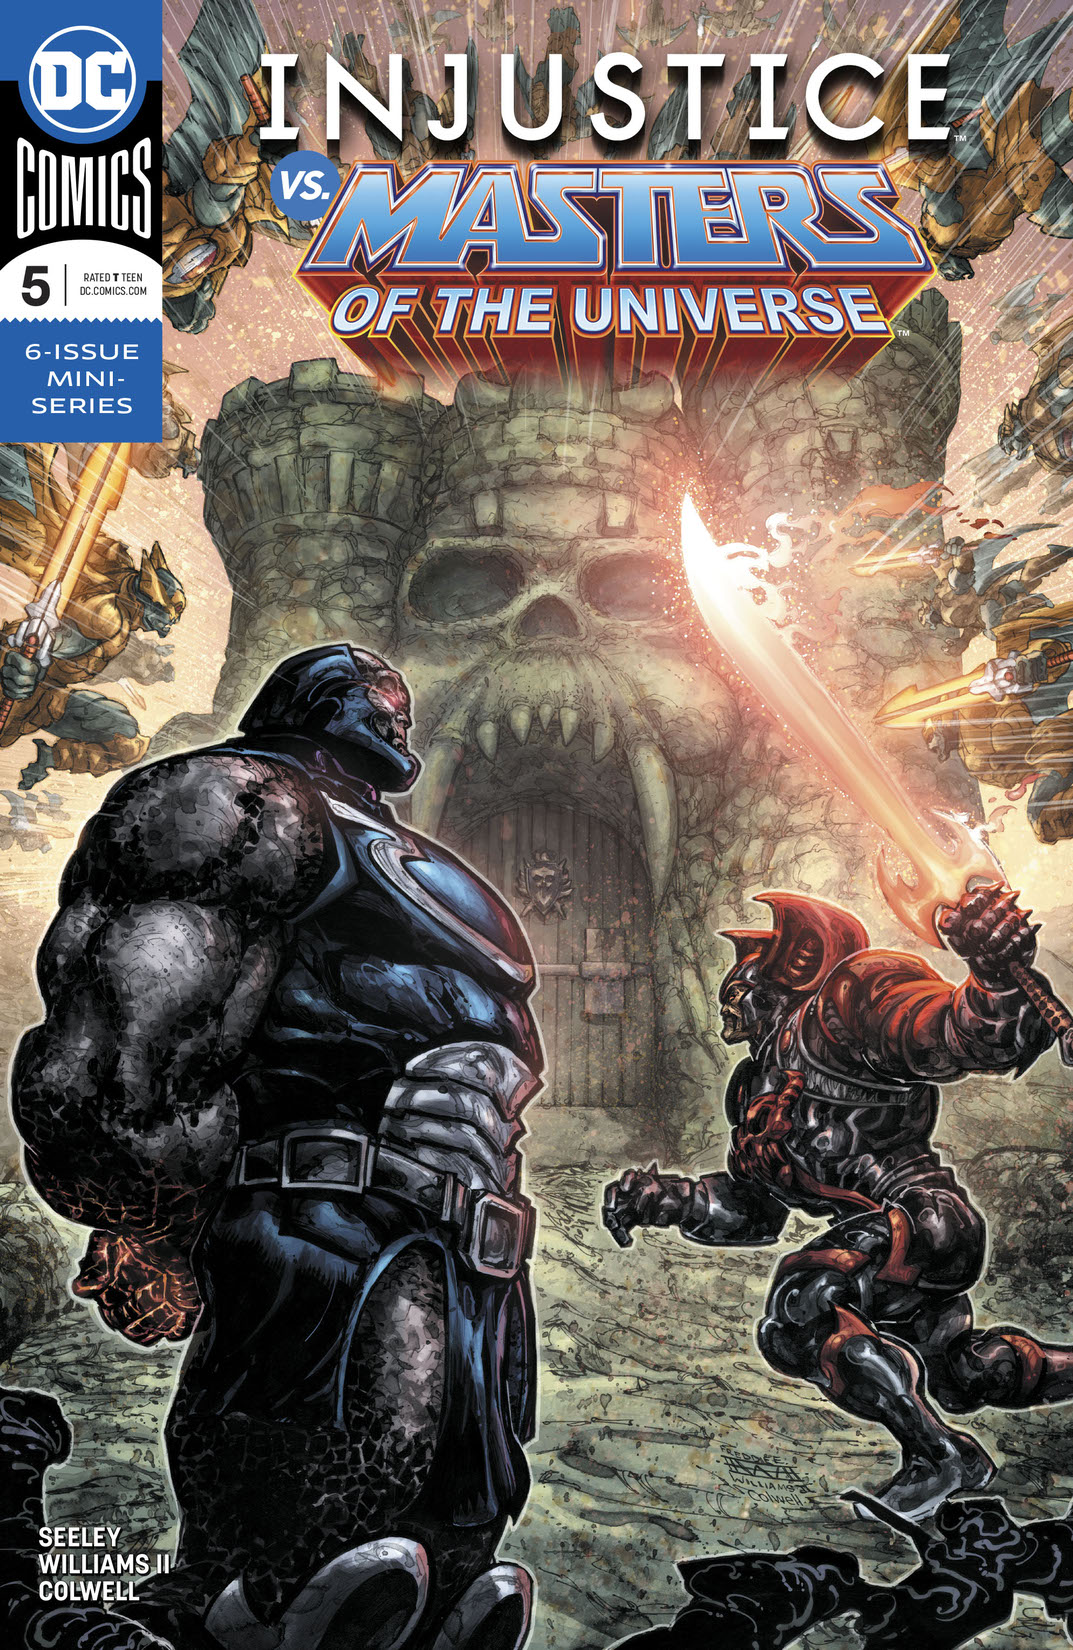 Injustice Vs. Masters of the Universe #5 preview images